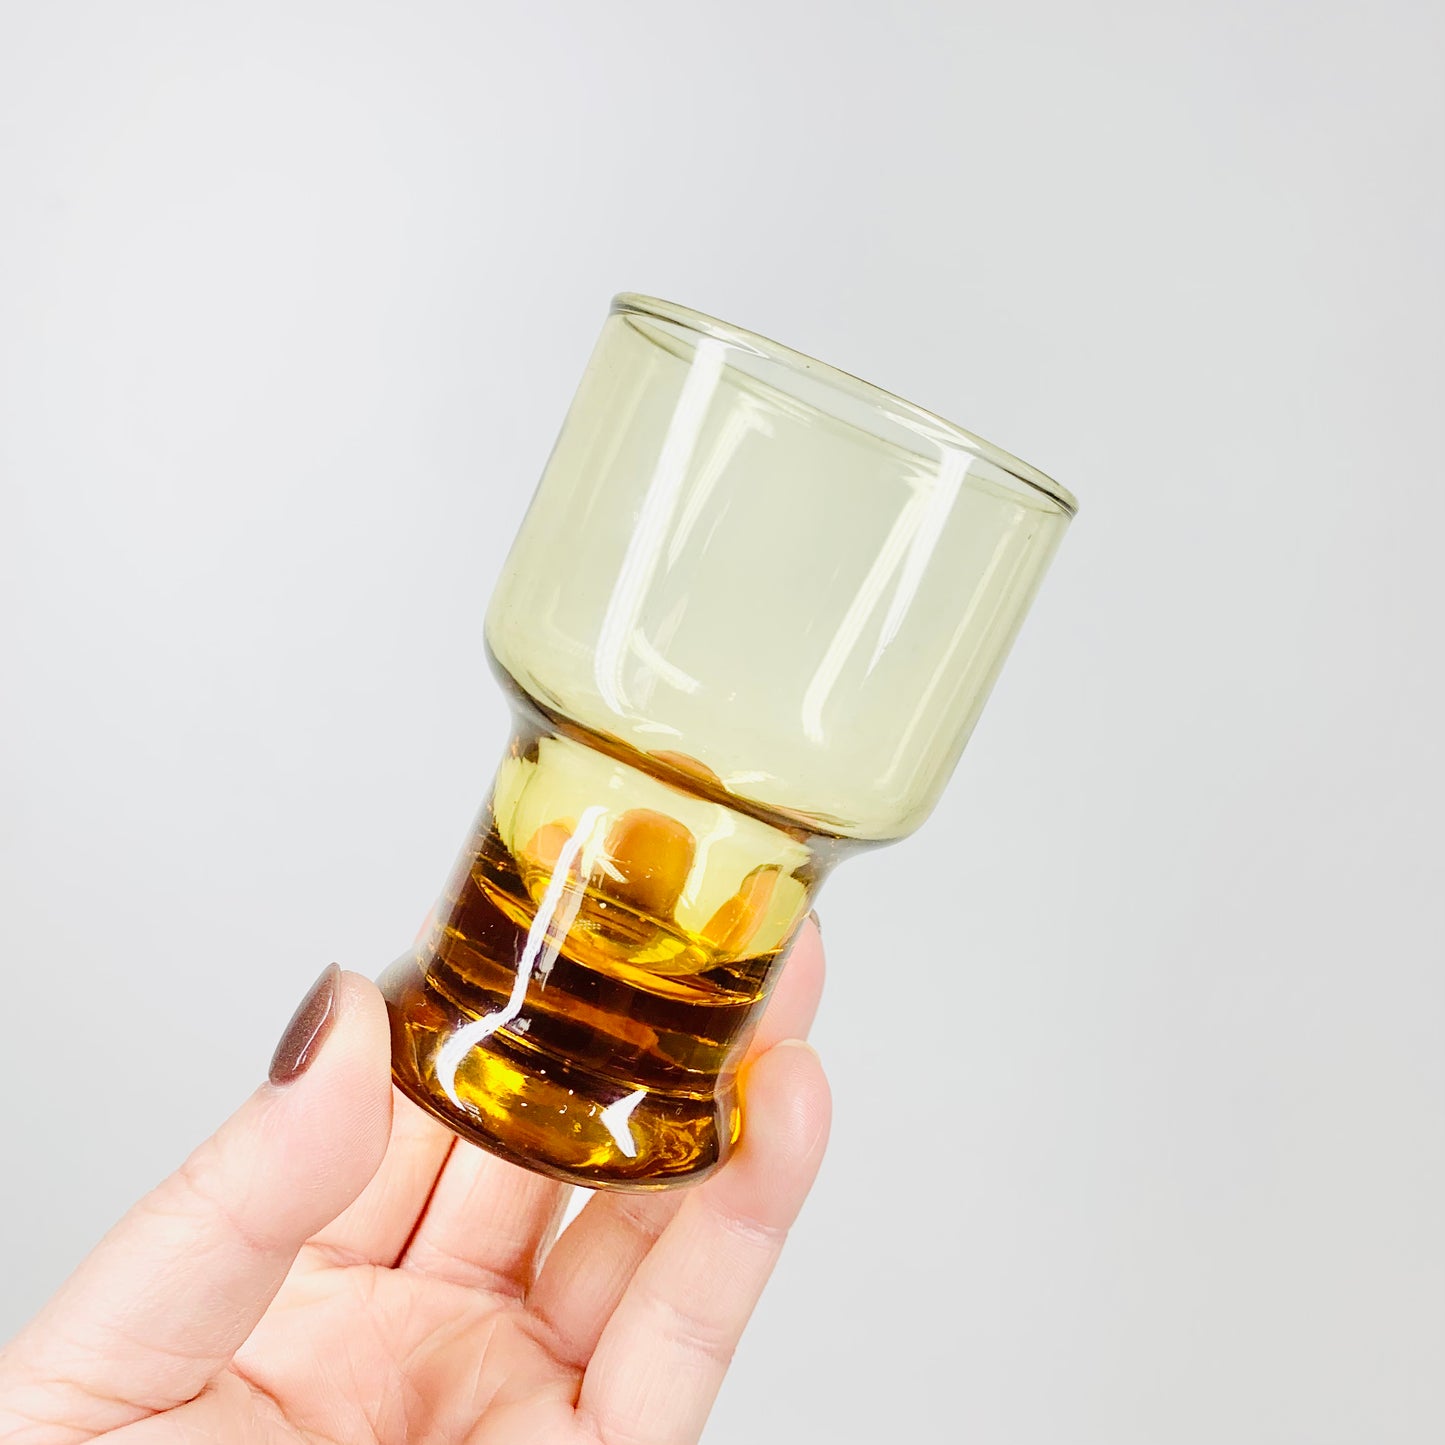 MCM amber shot glasses with paperweight base